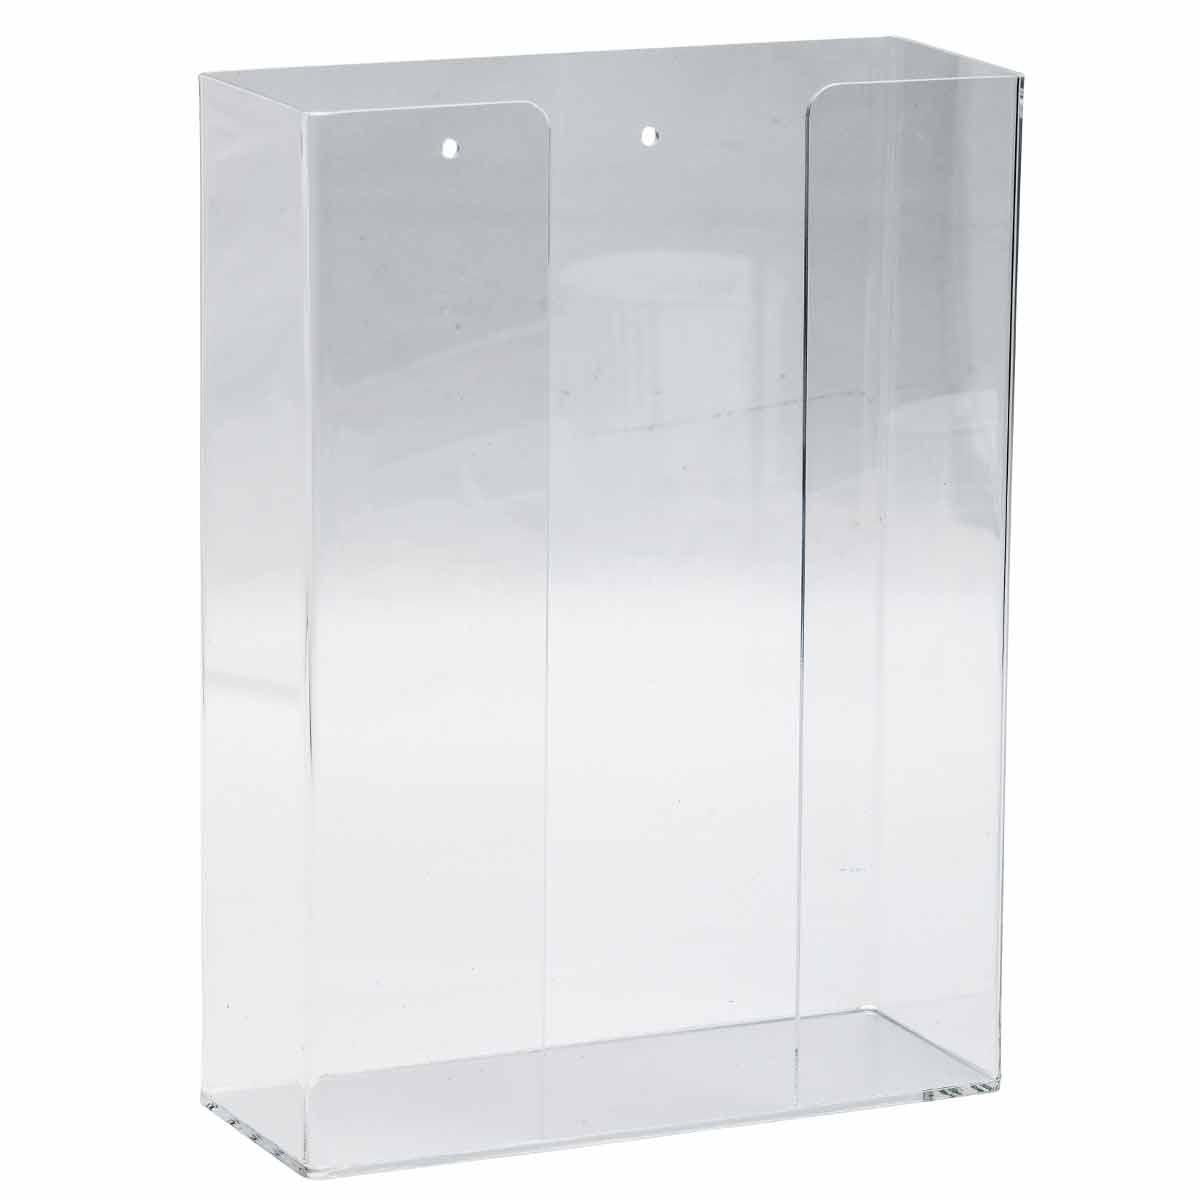 Brady® GD02 Double Box Glove Dispenser, 2-Compartment, Surface/Wall Mount, Hinged Top Dispensing, Acrylic Glass, Clear